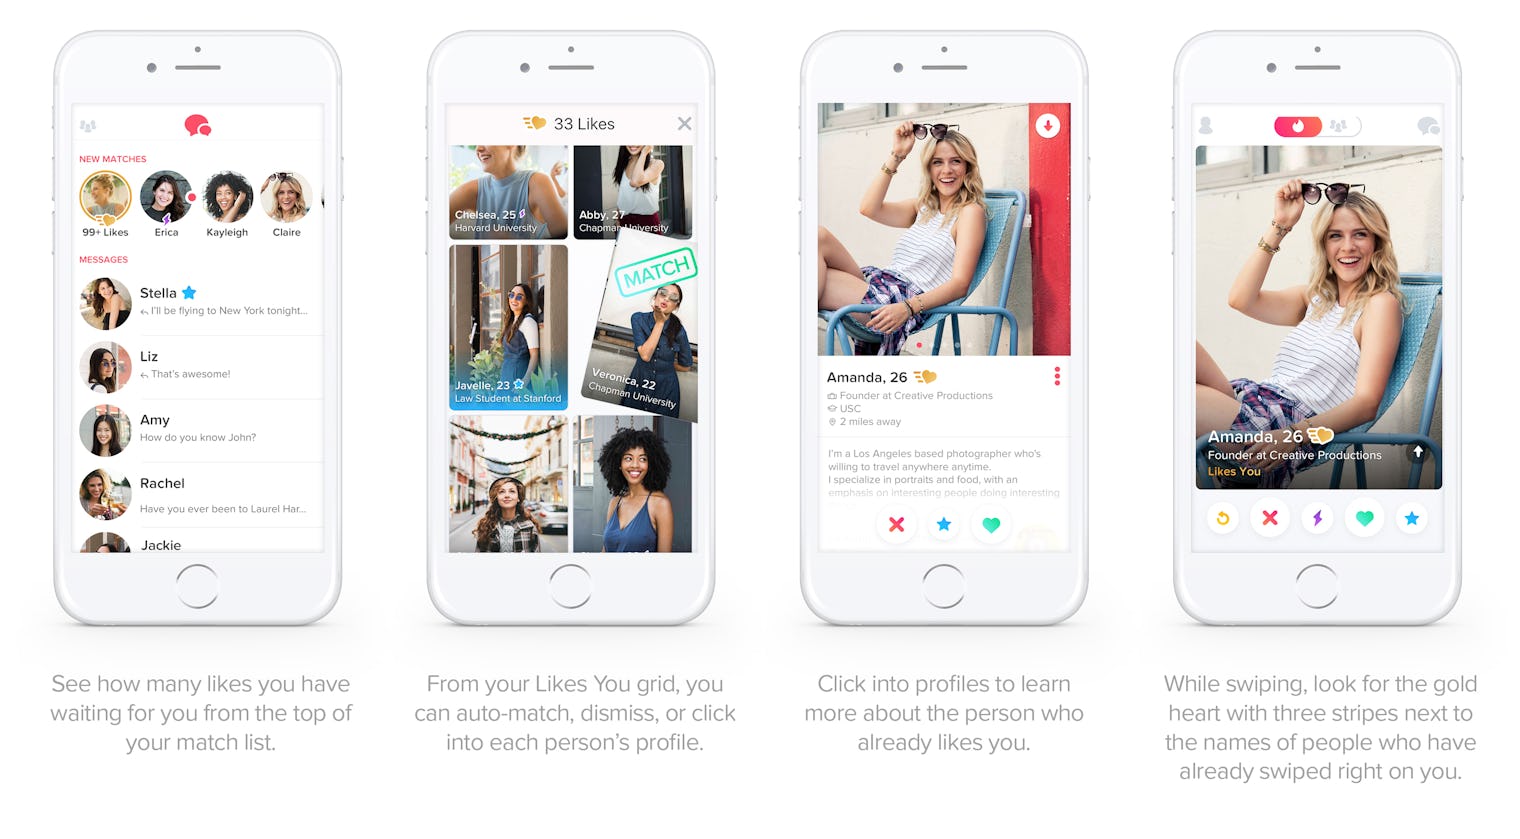 What Is Tinder Gold? You Can See Who Likes You Through The App's New